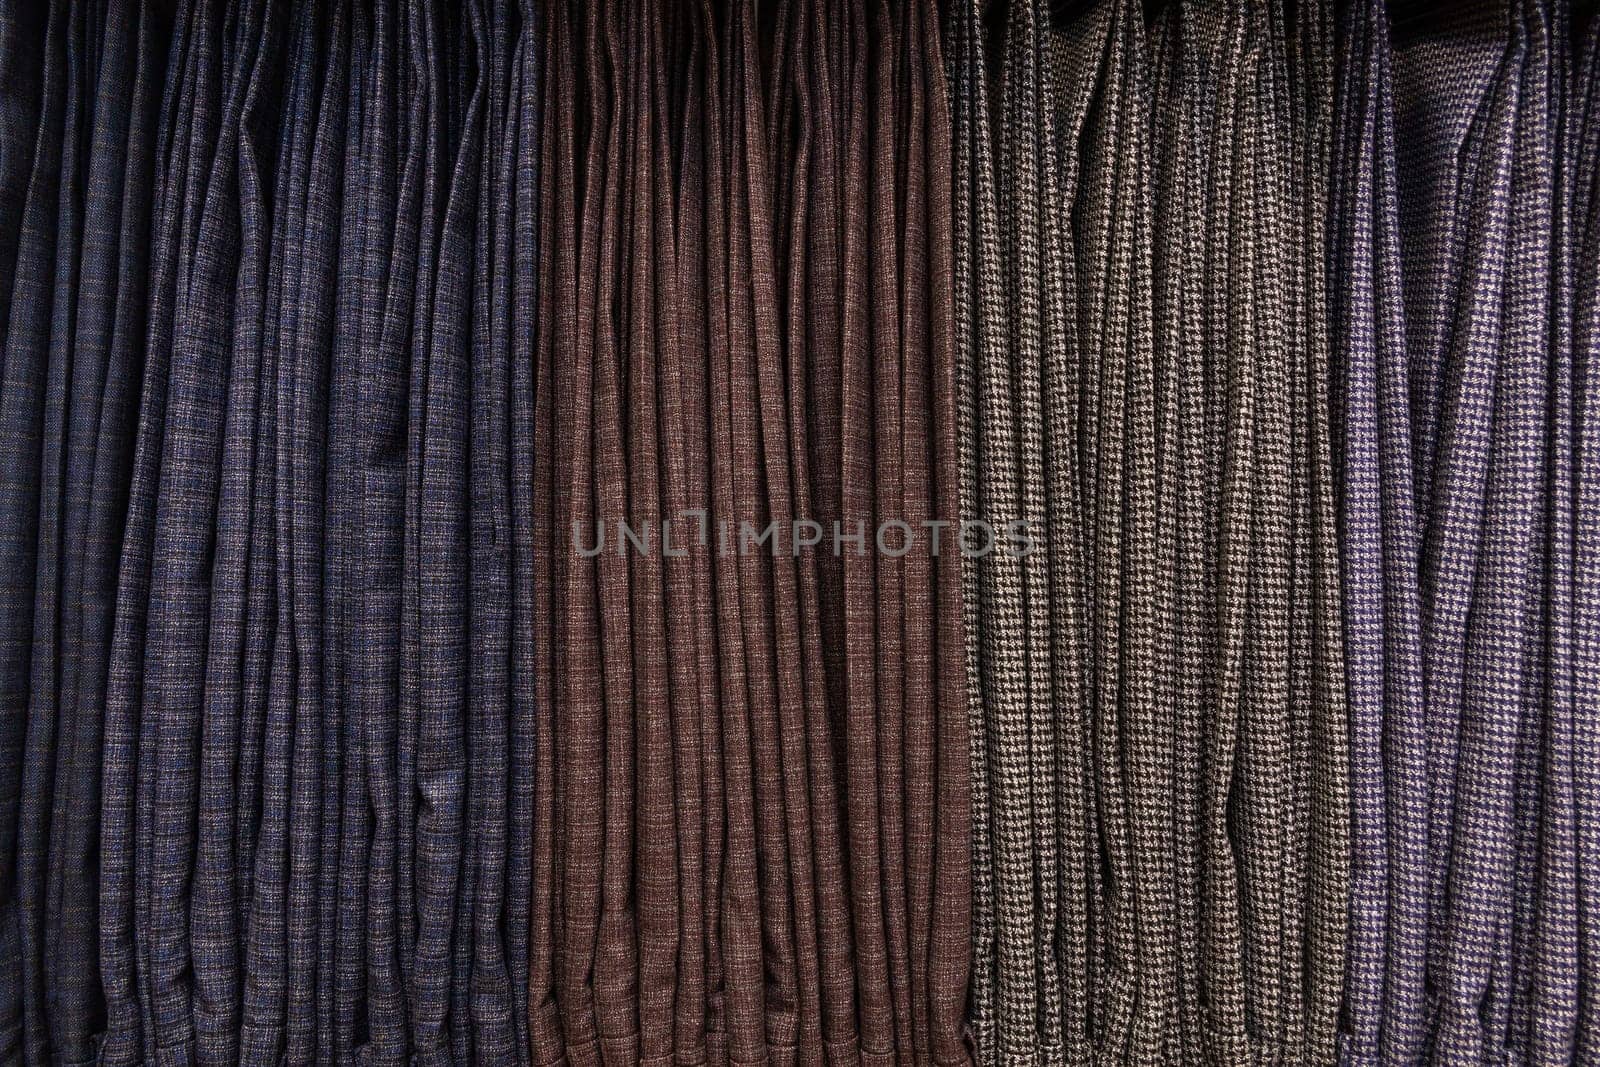 Background with men's classic trousers on hangers in a boutique. Showcase with many men's trousers hanging on hangers in stock on hangers in a men's clothing store.